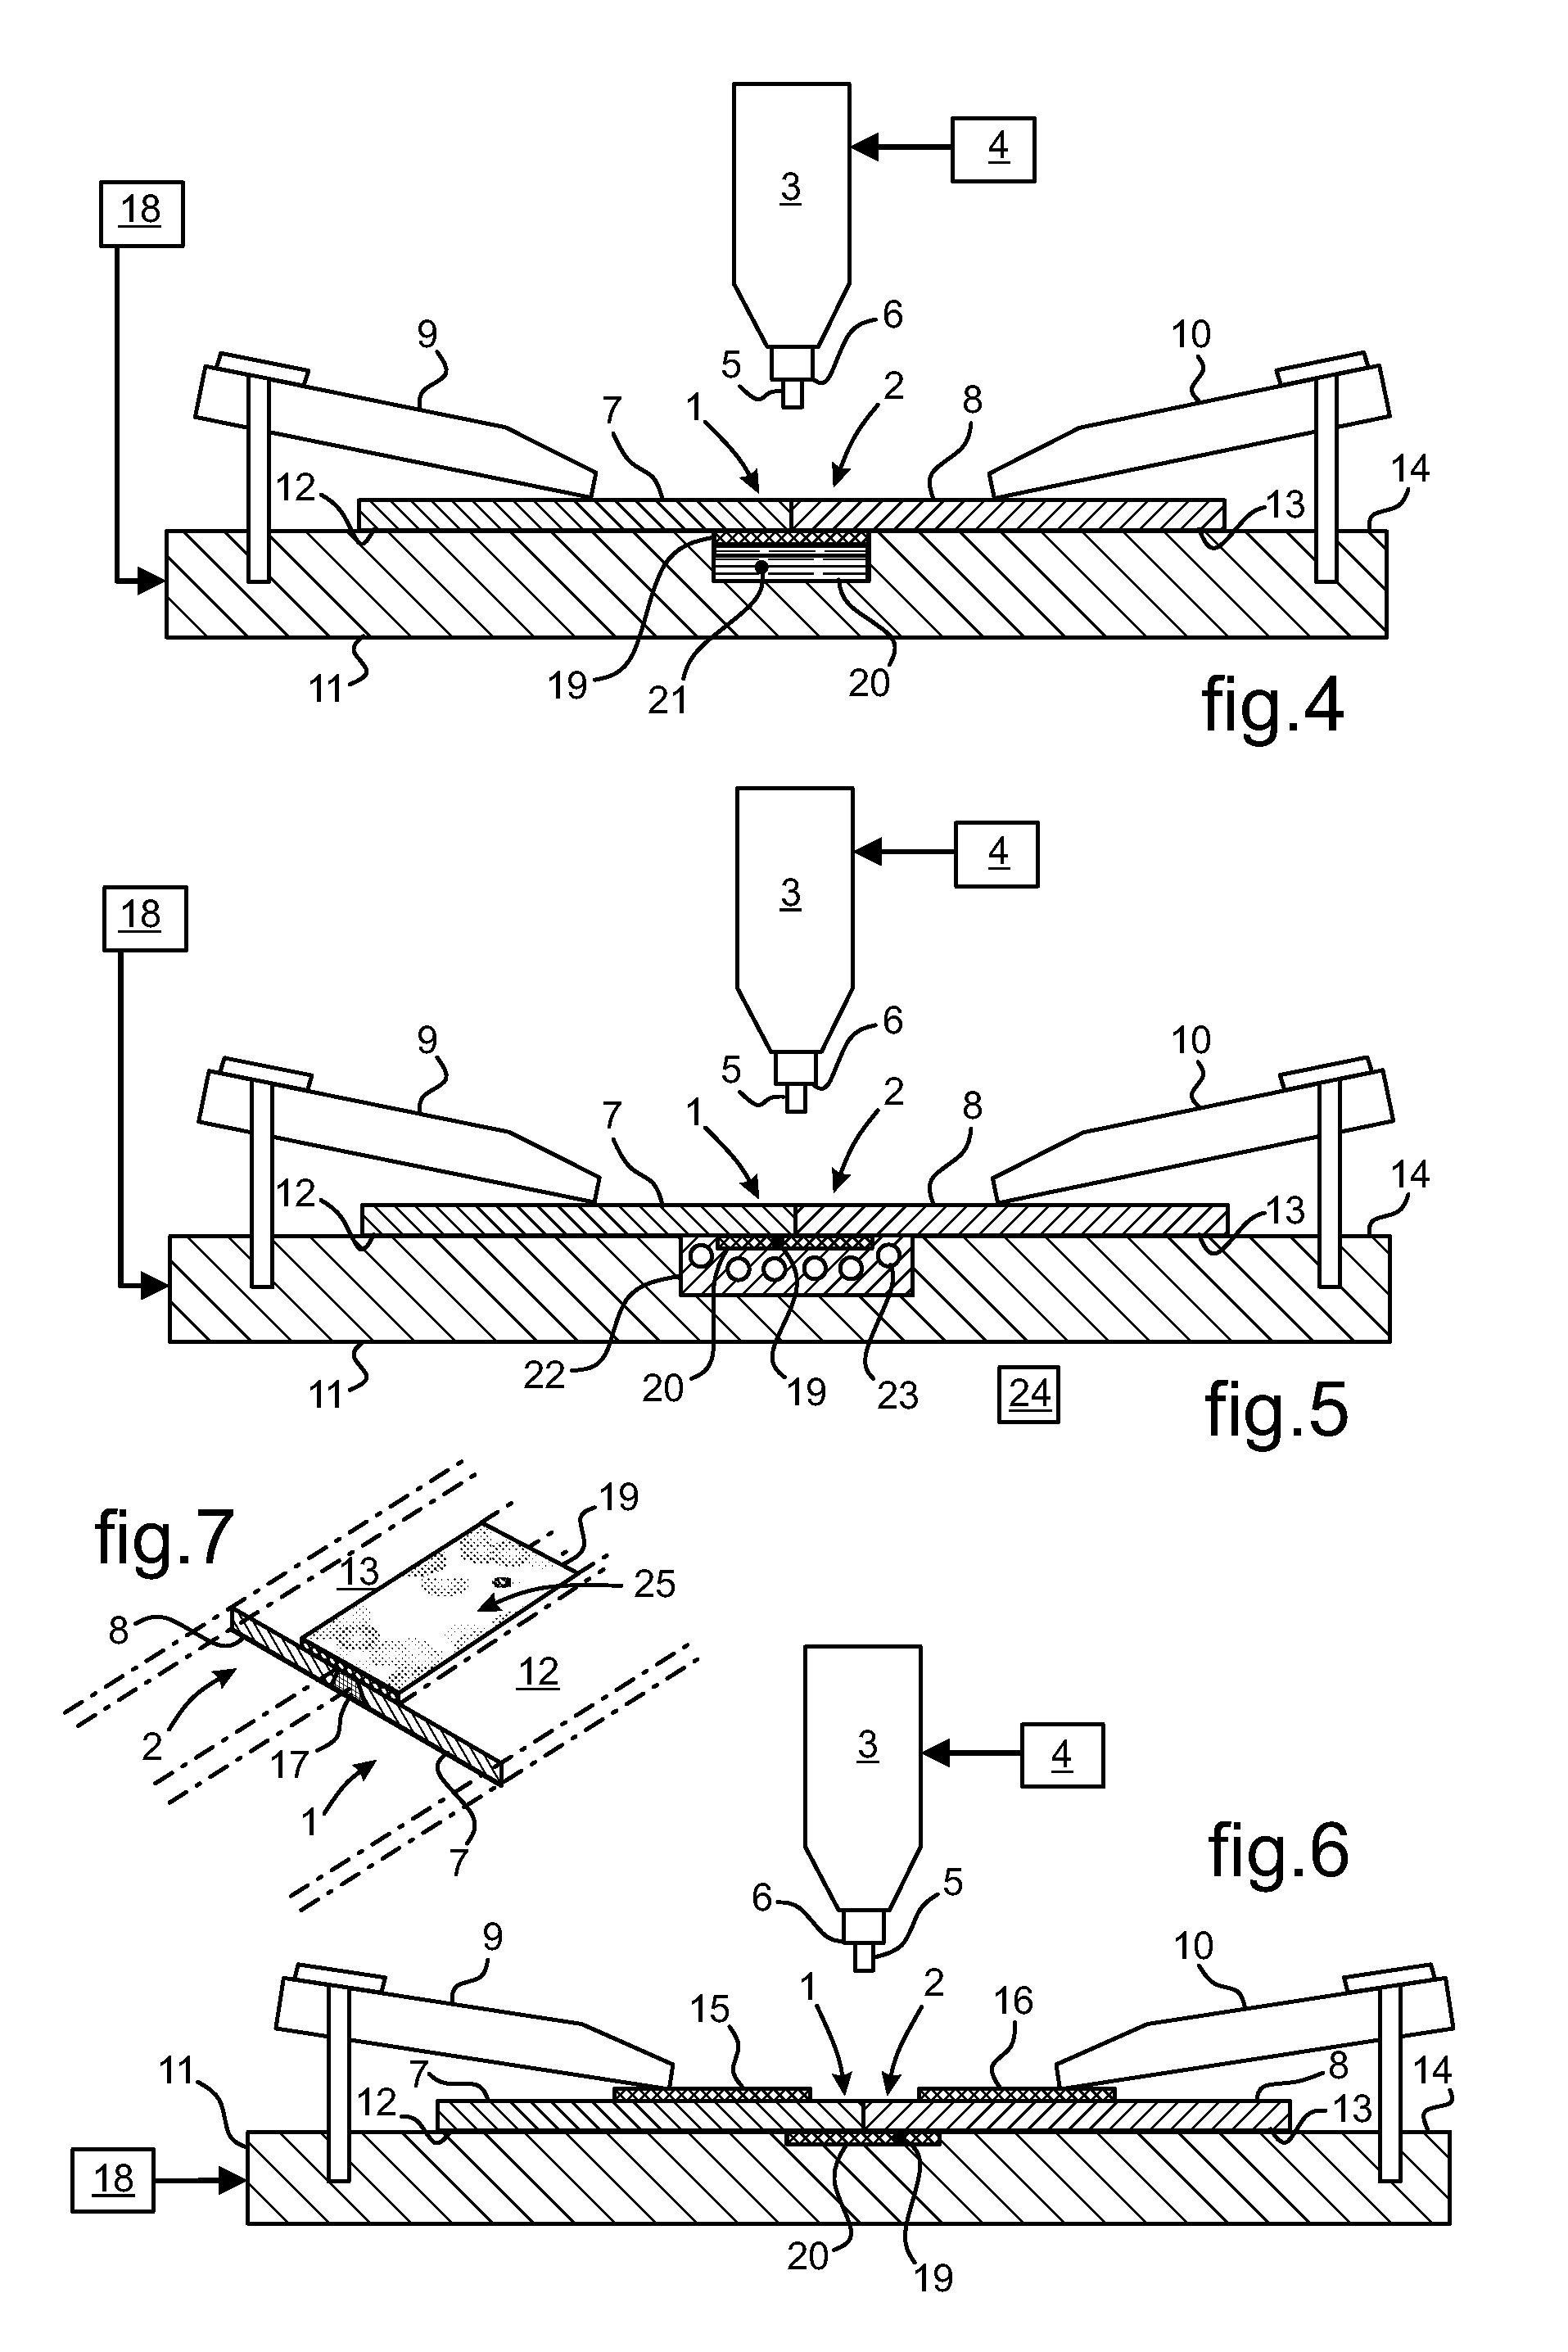 Method of assembling metal parts by friction welding, with the welding temperature being controlled using thermally conductive elements